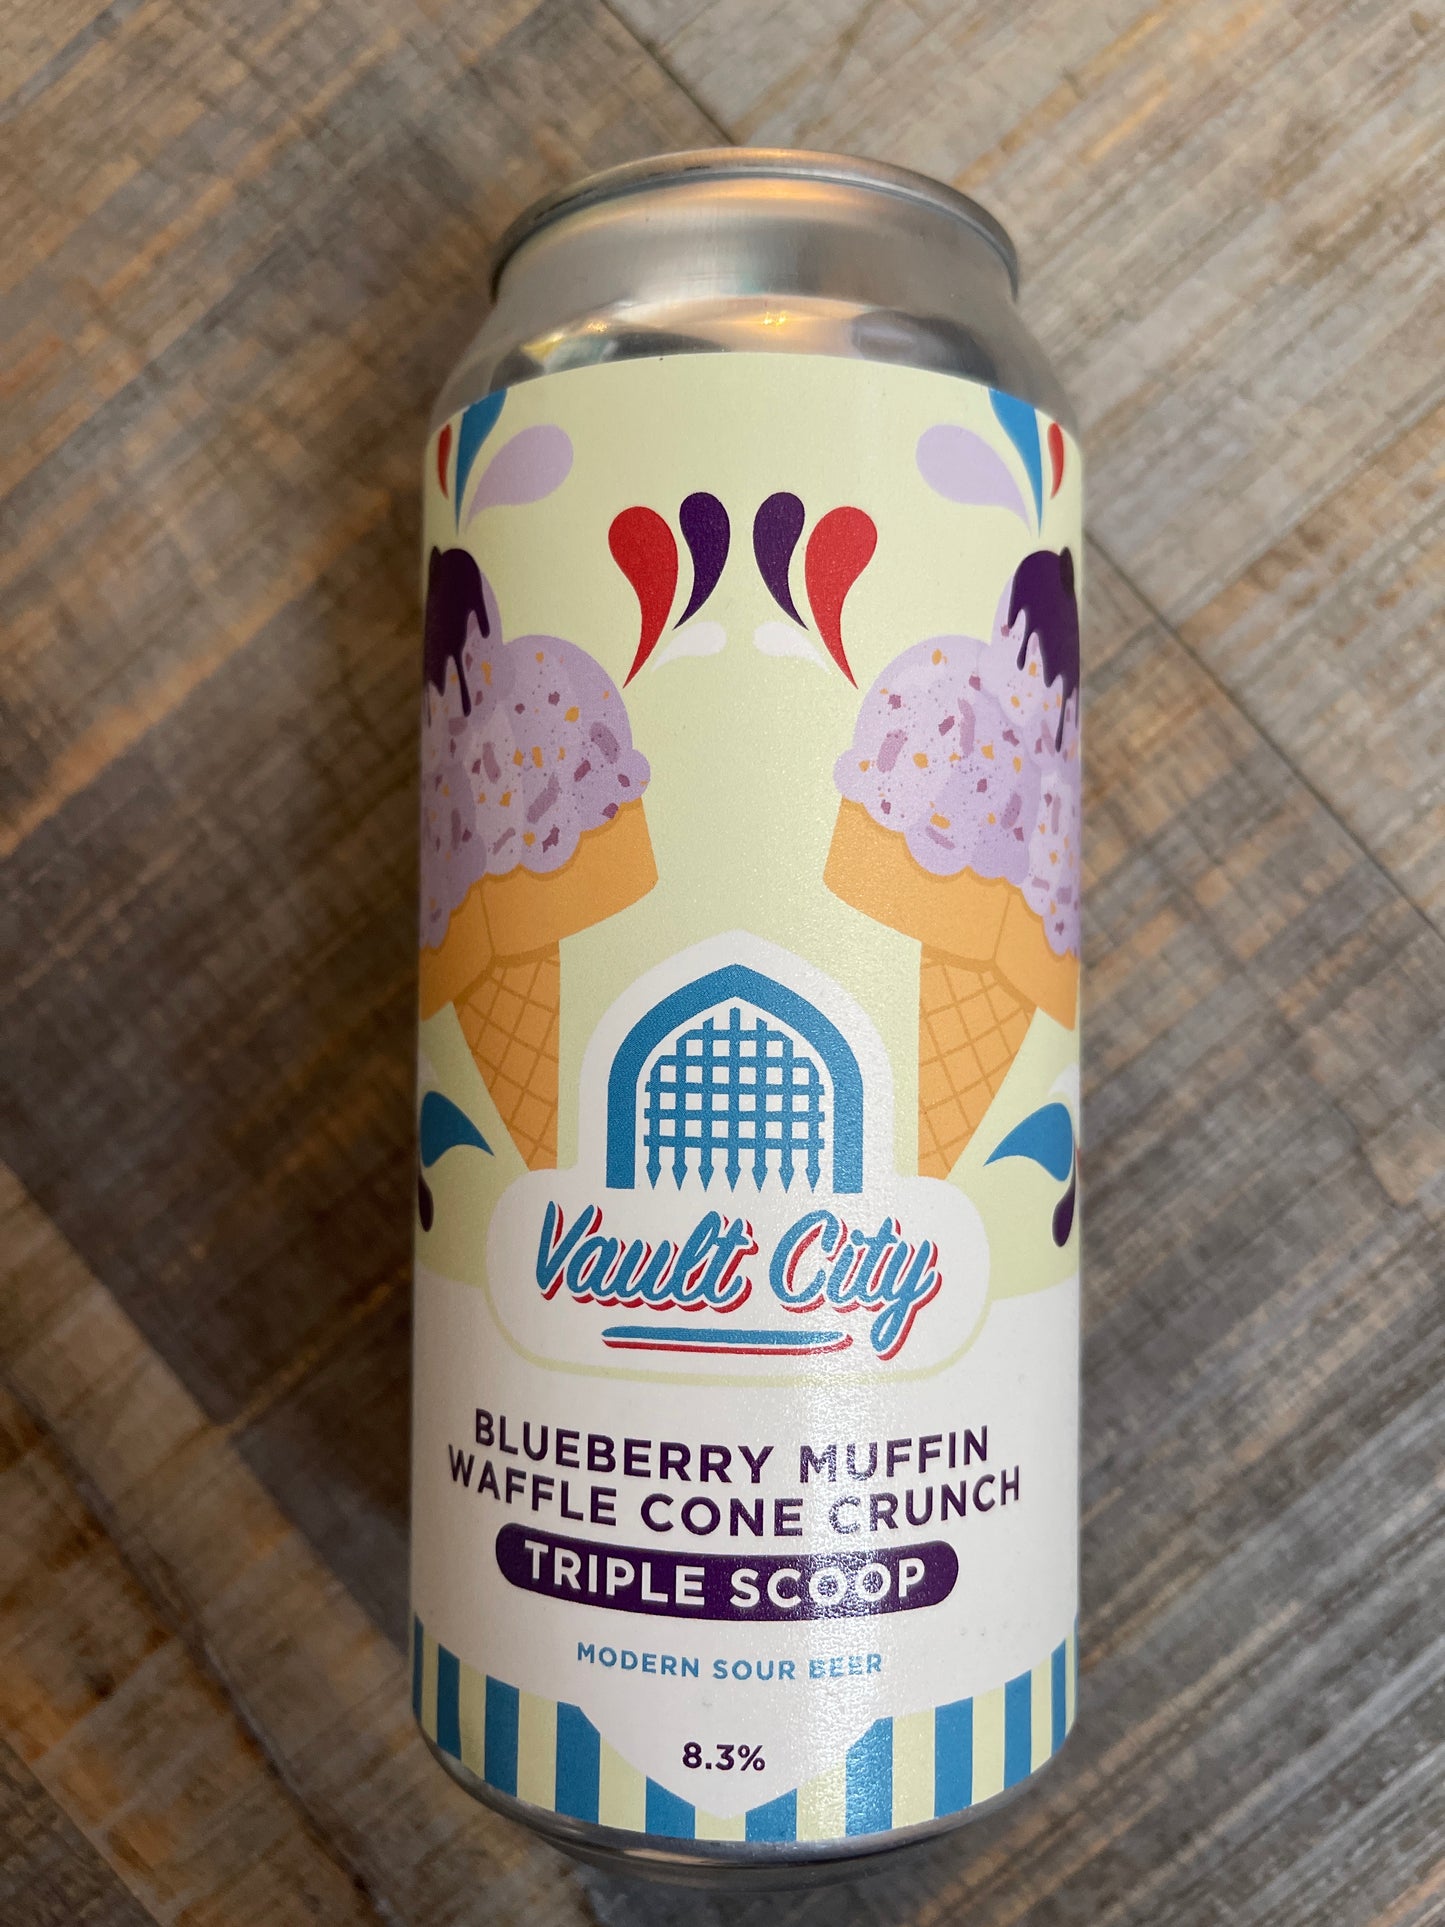 Vault City - Blueberry Muffin Waffle Cone Crunch Triple Scoop (Sour)